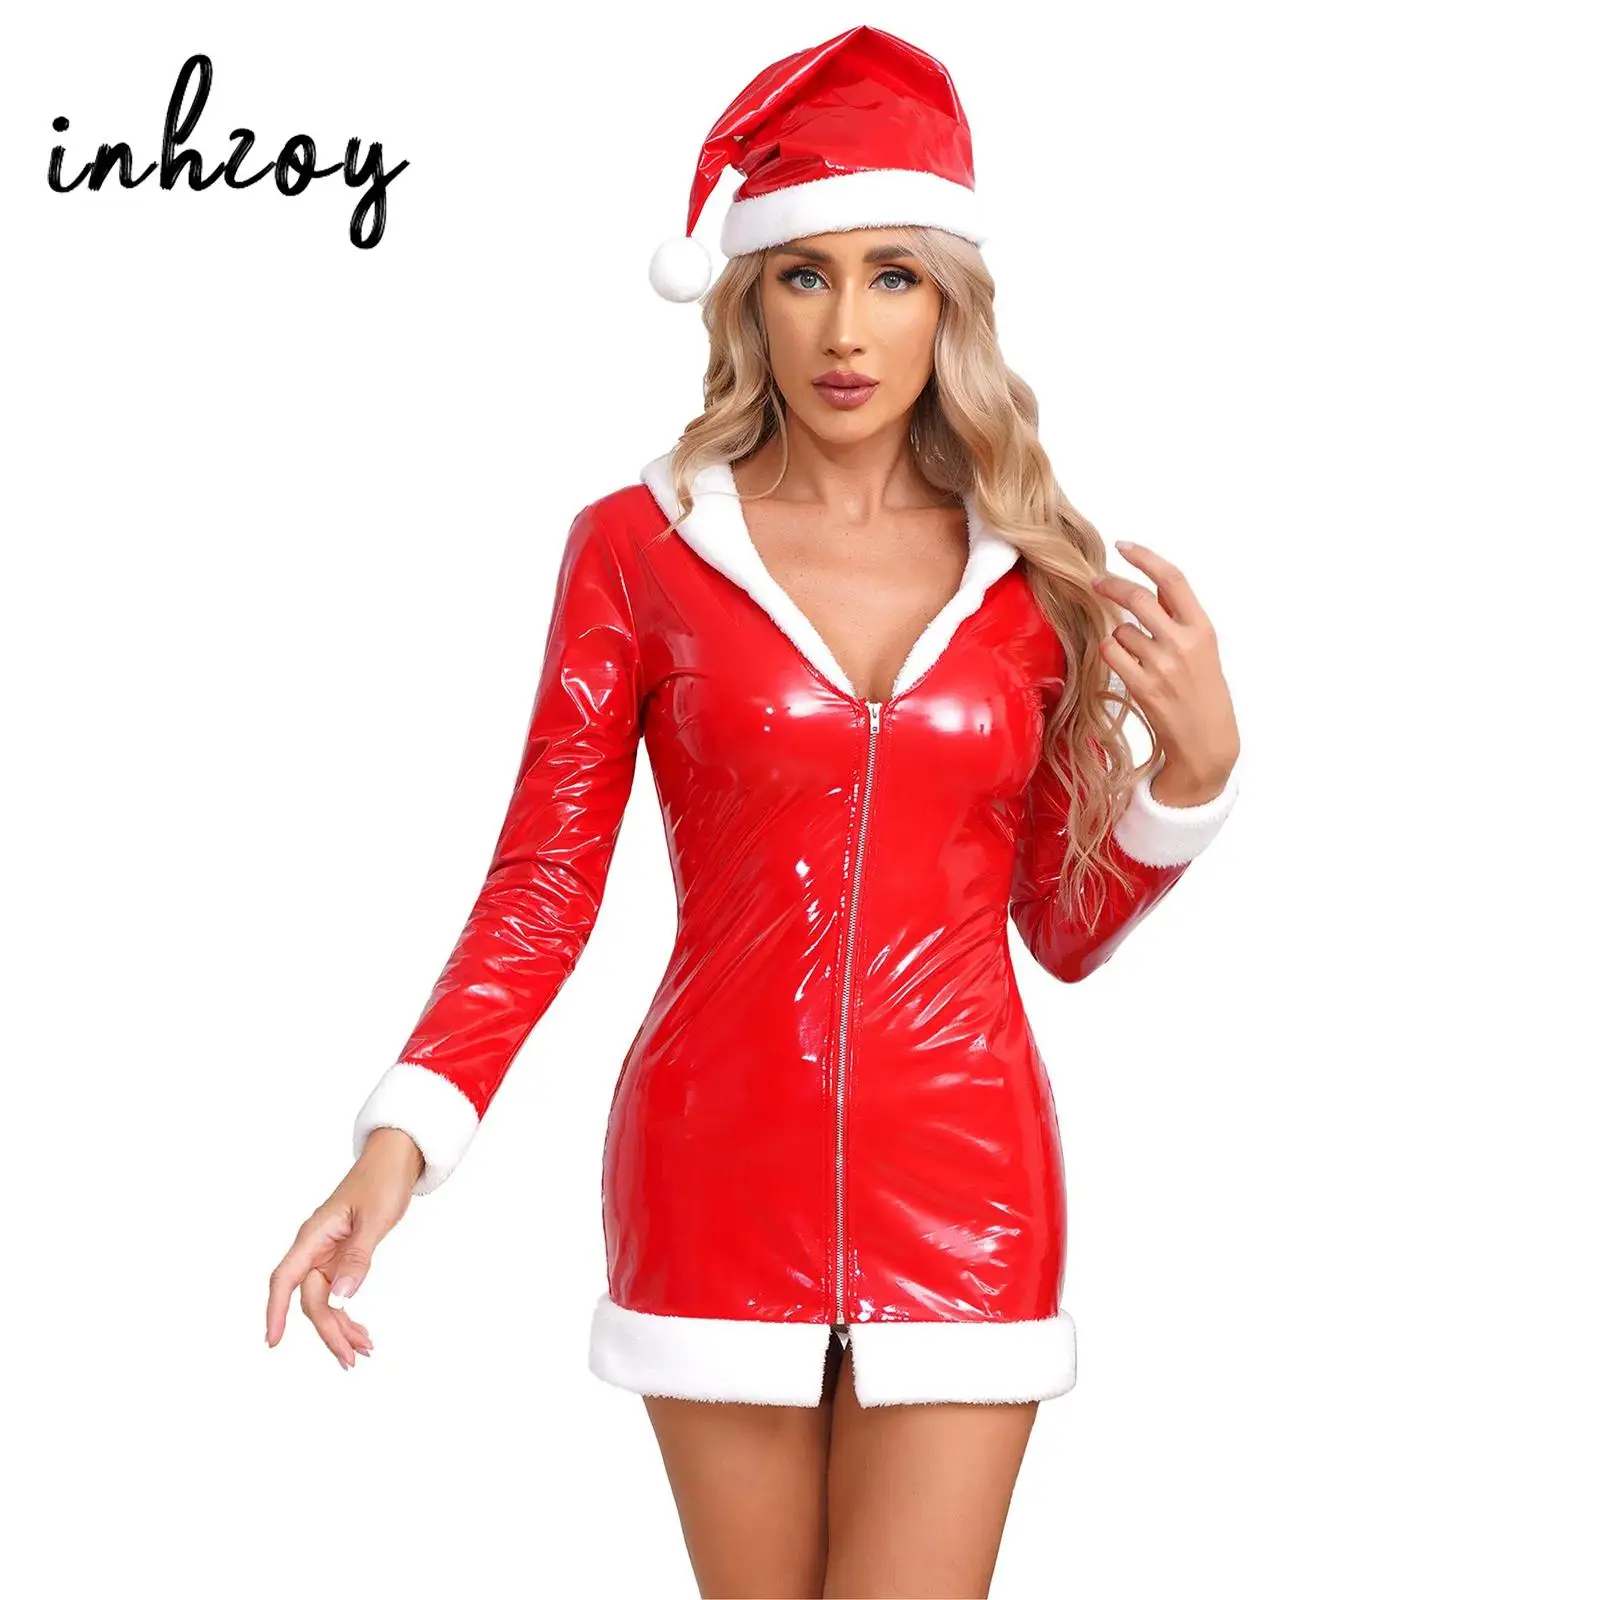 

Womens Wet Look Patent Leather Christmas Dress Sexy Santa Claus Costume Long Sleeve Zipper Bodycon Mini Dress with Hat Clubwear